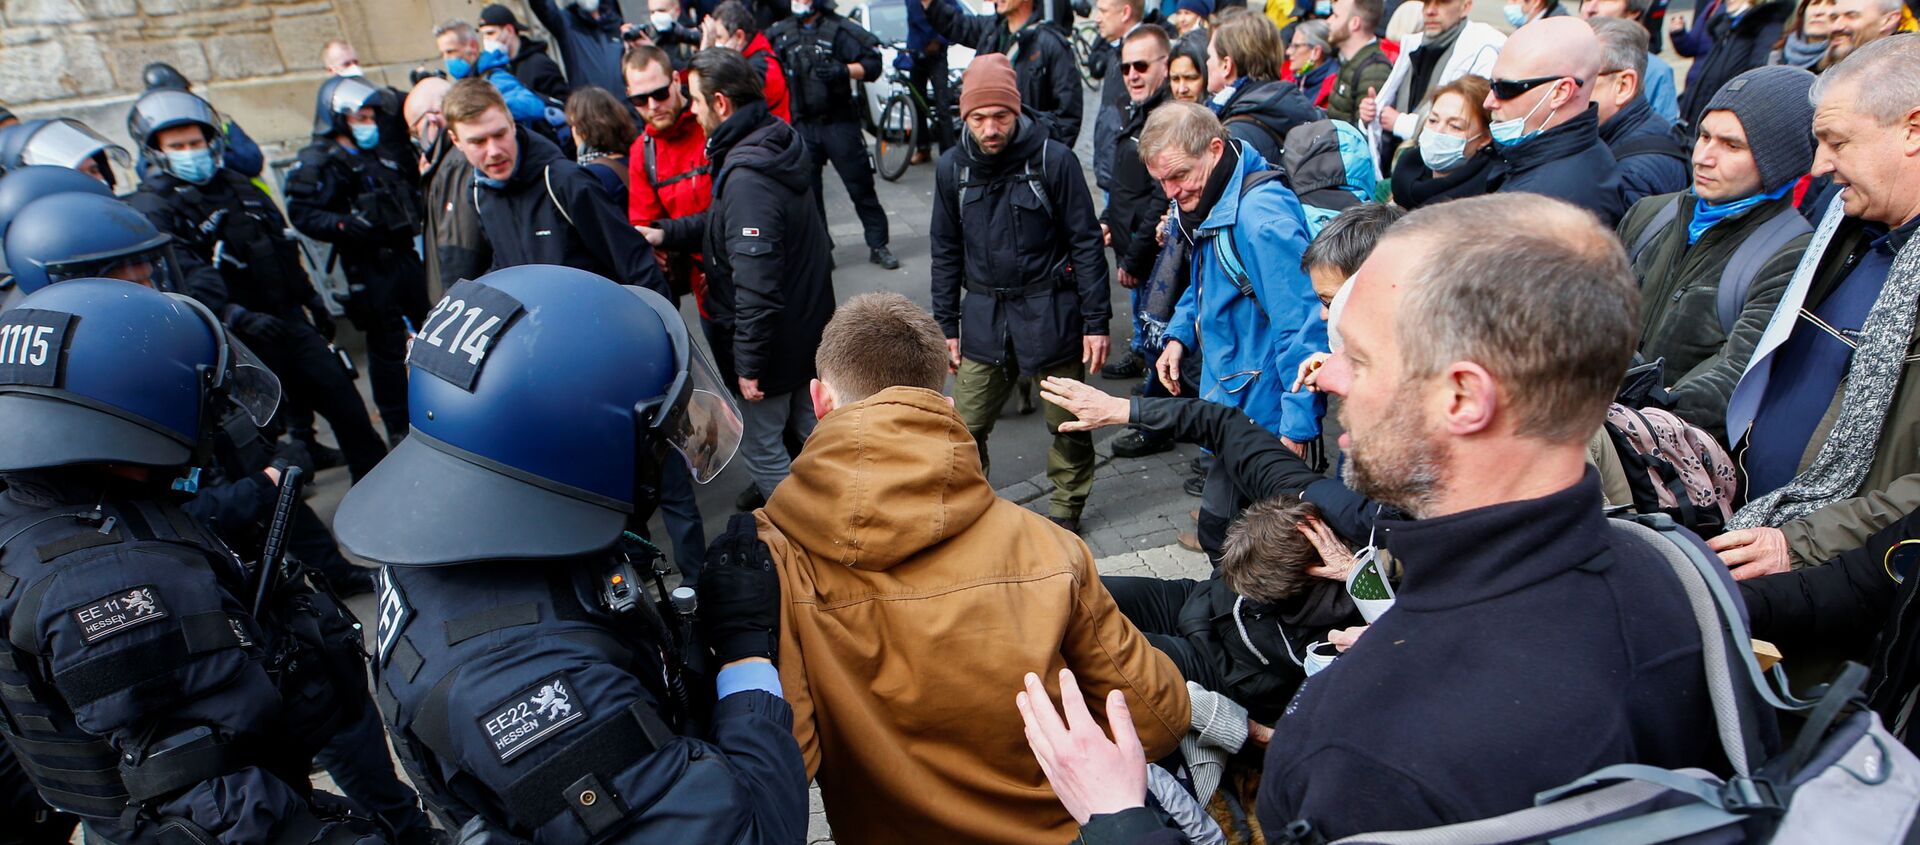 Demonstrators clash with police during a protest against the government's coronavirus disease (COVID-19) restrictions in Kassel, Germany March 20, 2021 - Sputnik International, 1920